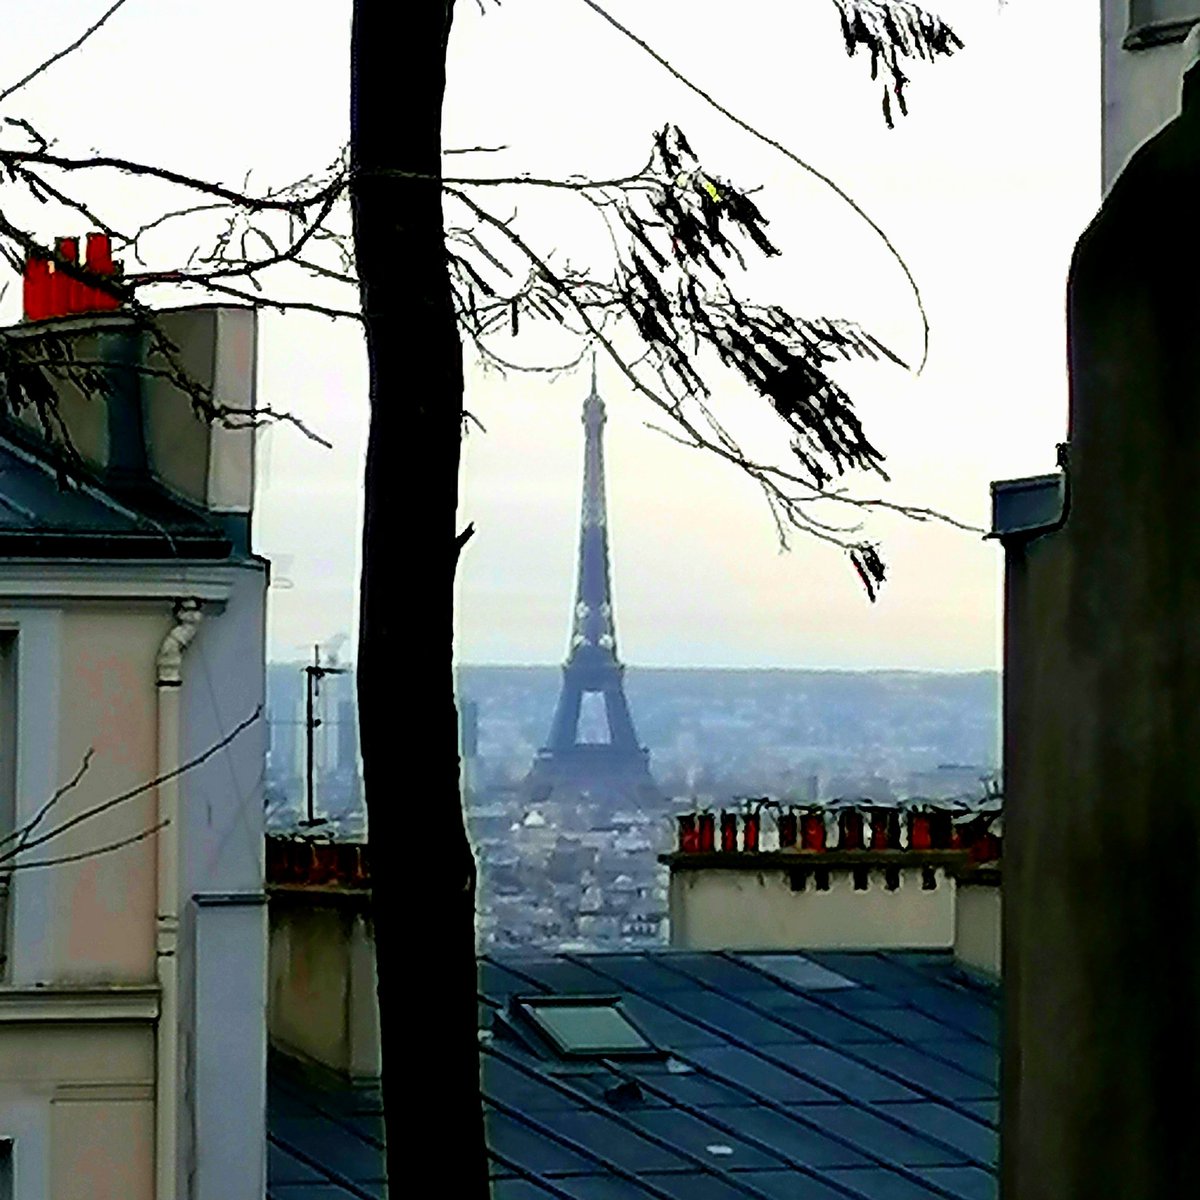 Where would you like to celebrate your birthday? 55 years today and in Montmartre #parisinspiration #eiffeltower #parisjetaime #eiffeltower #montmartre  #fiftyplus #parisienne